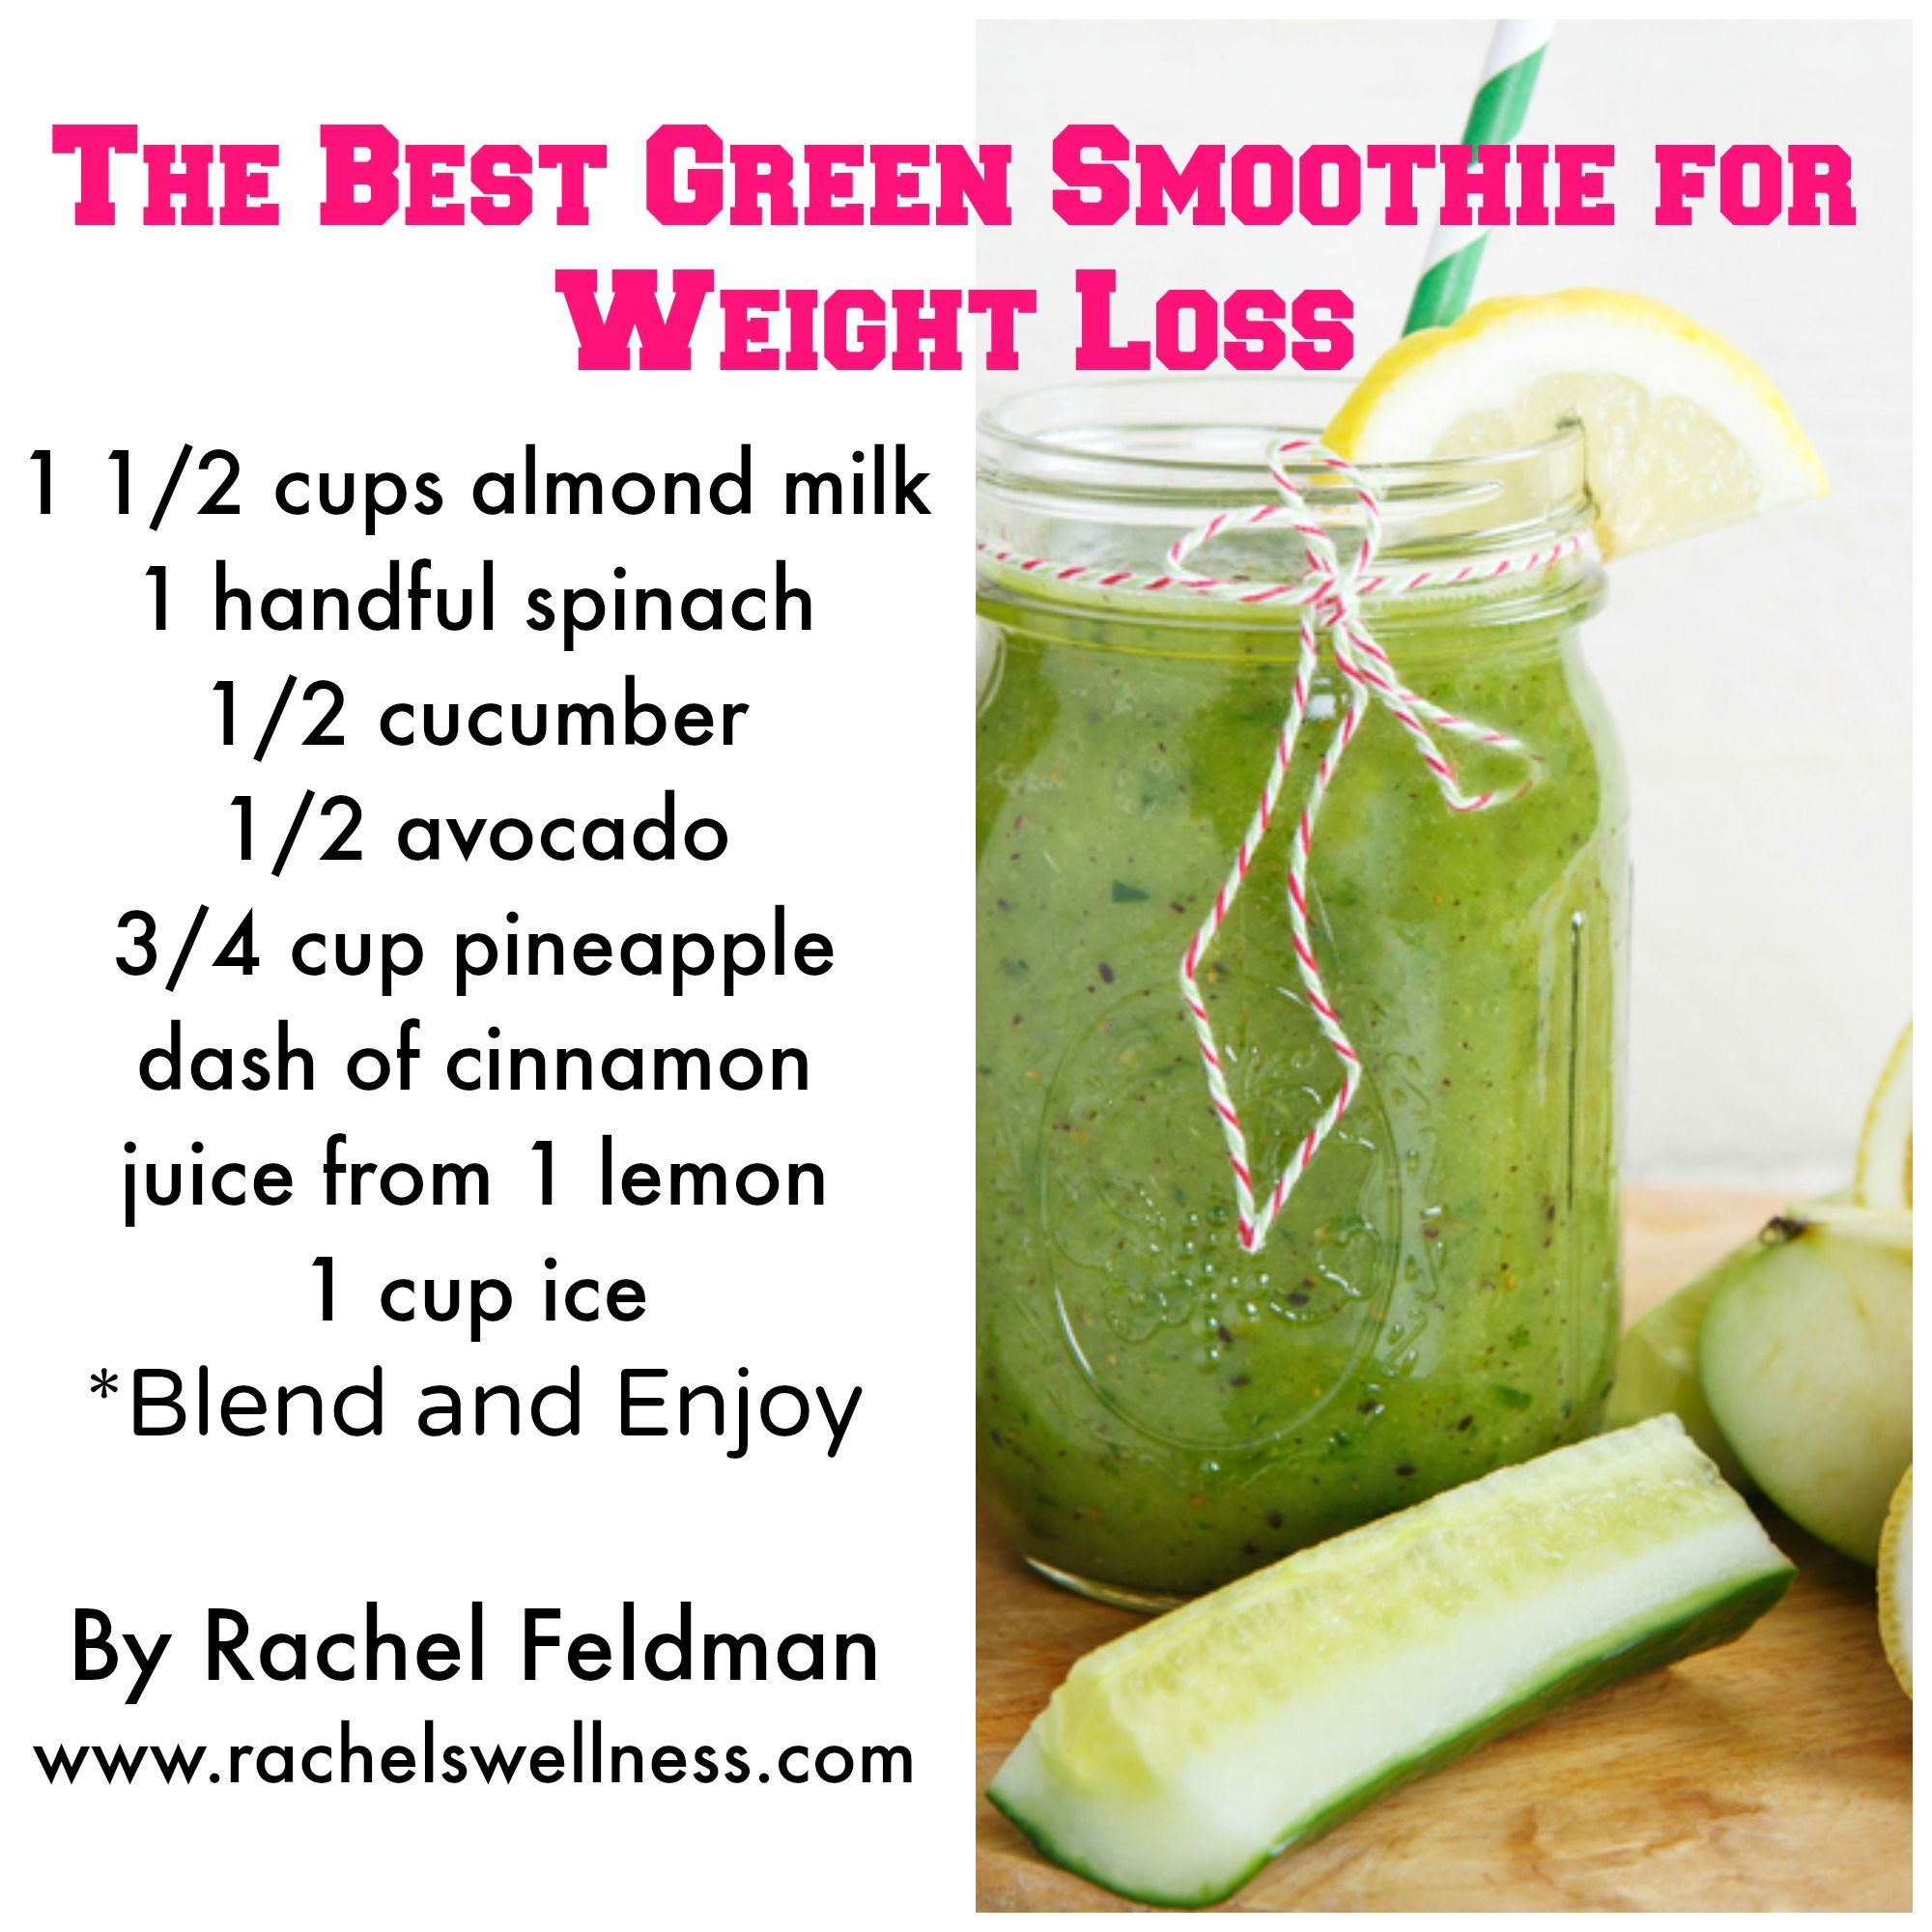 Healthy Smoothies For Weight Loss
 7 Healthy Green Smoothie Recipes For Weight Loss